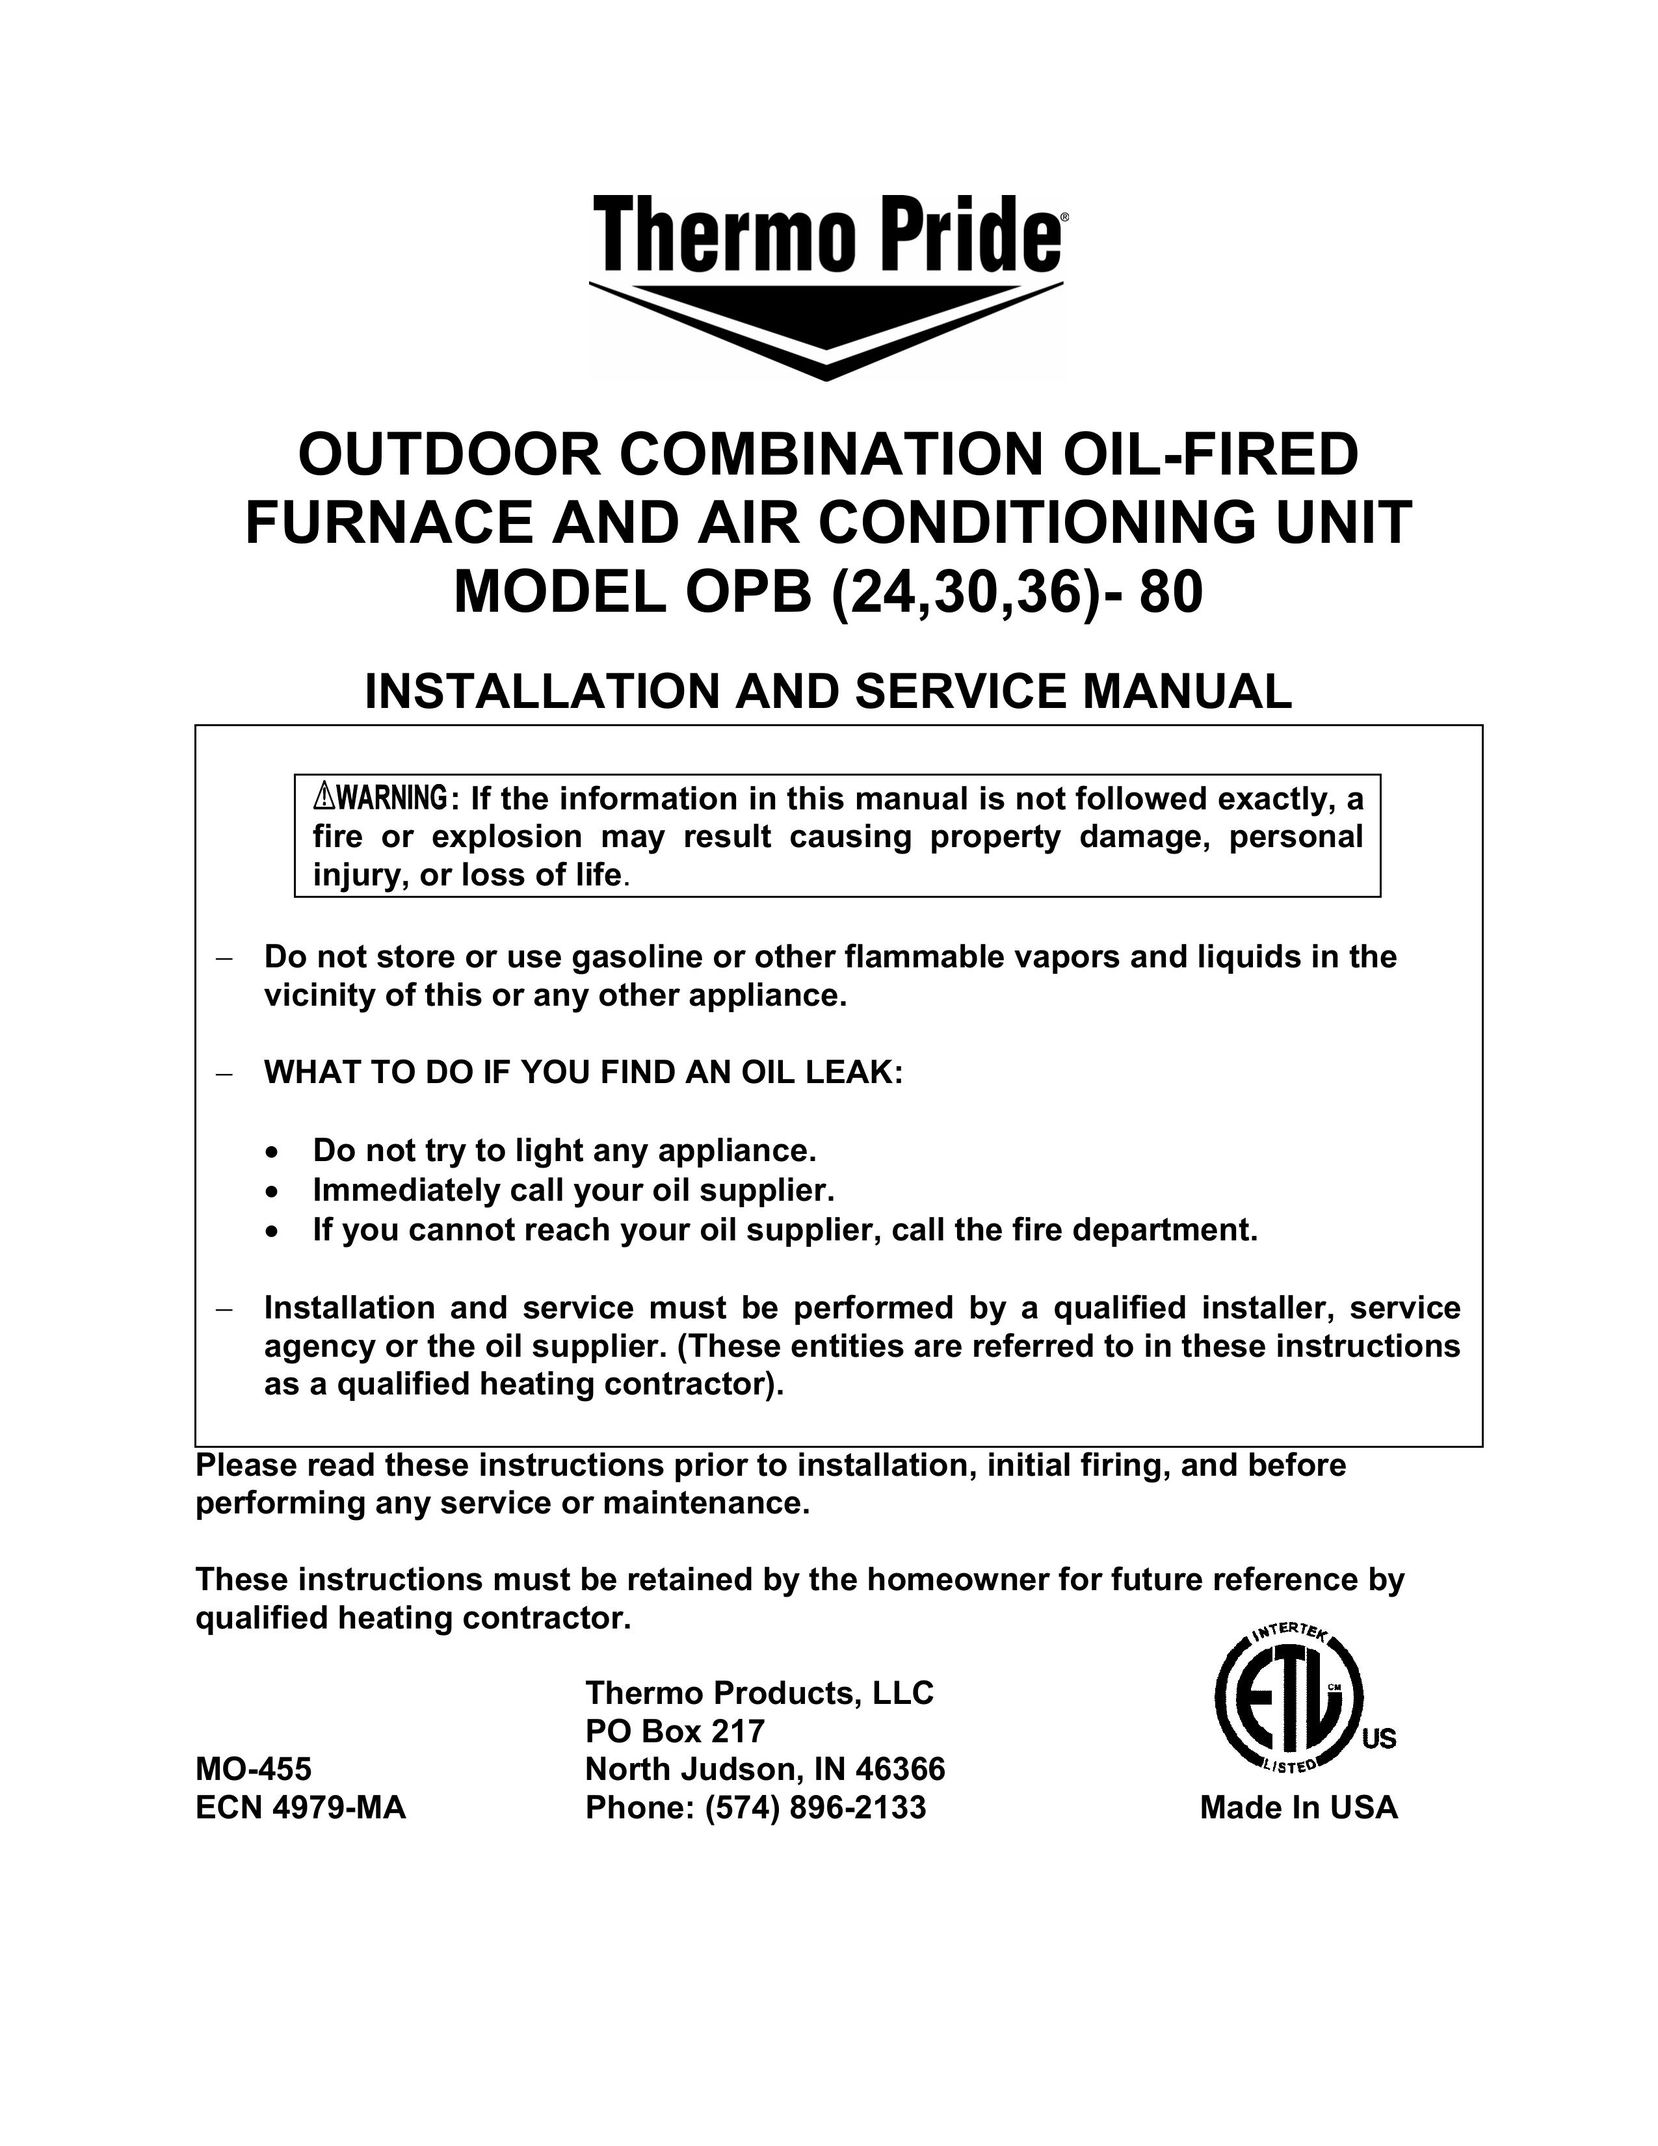 Thermo Products 36)- 80 Air Conditioner User Manual